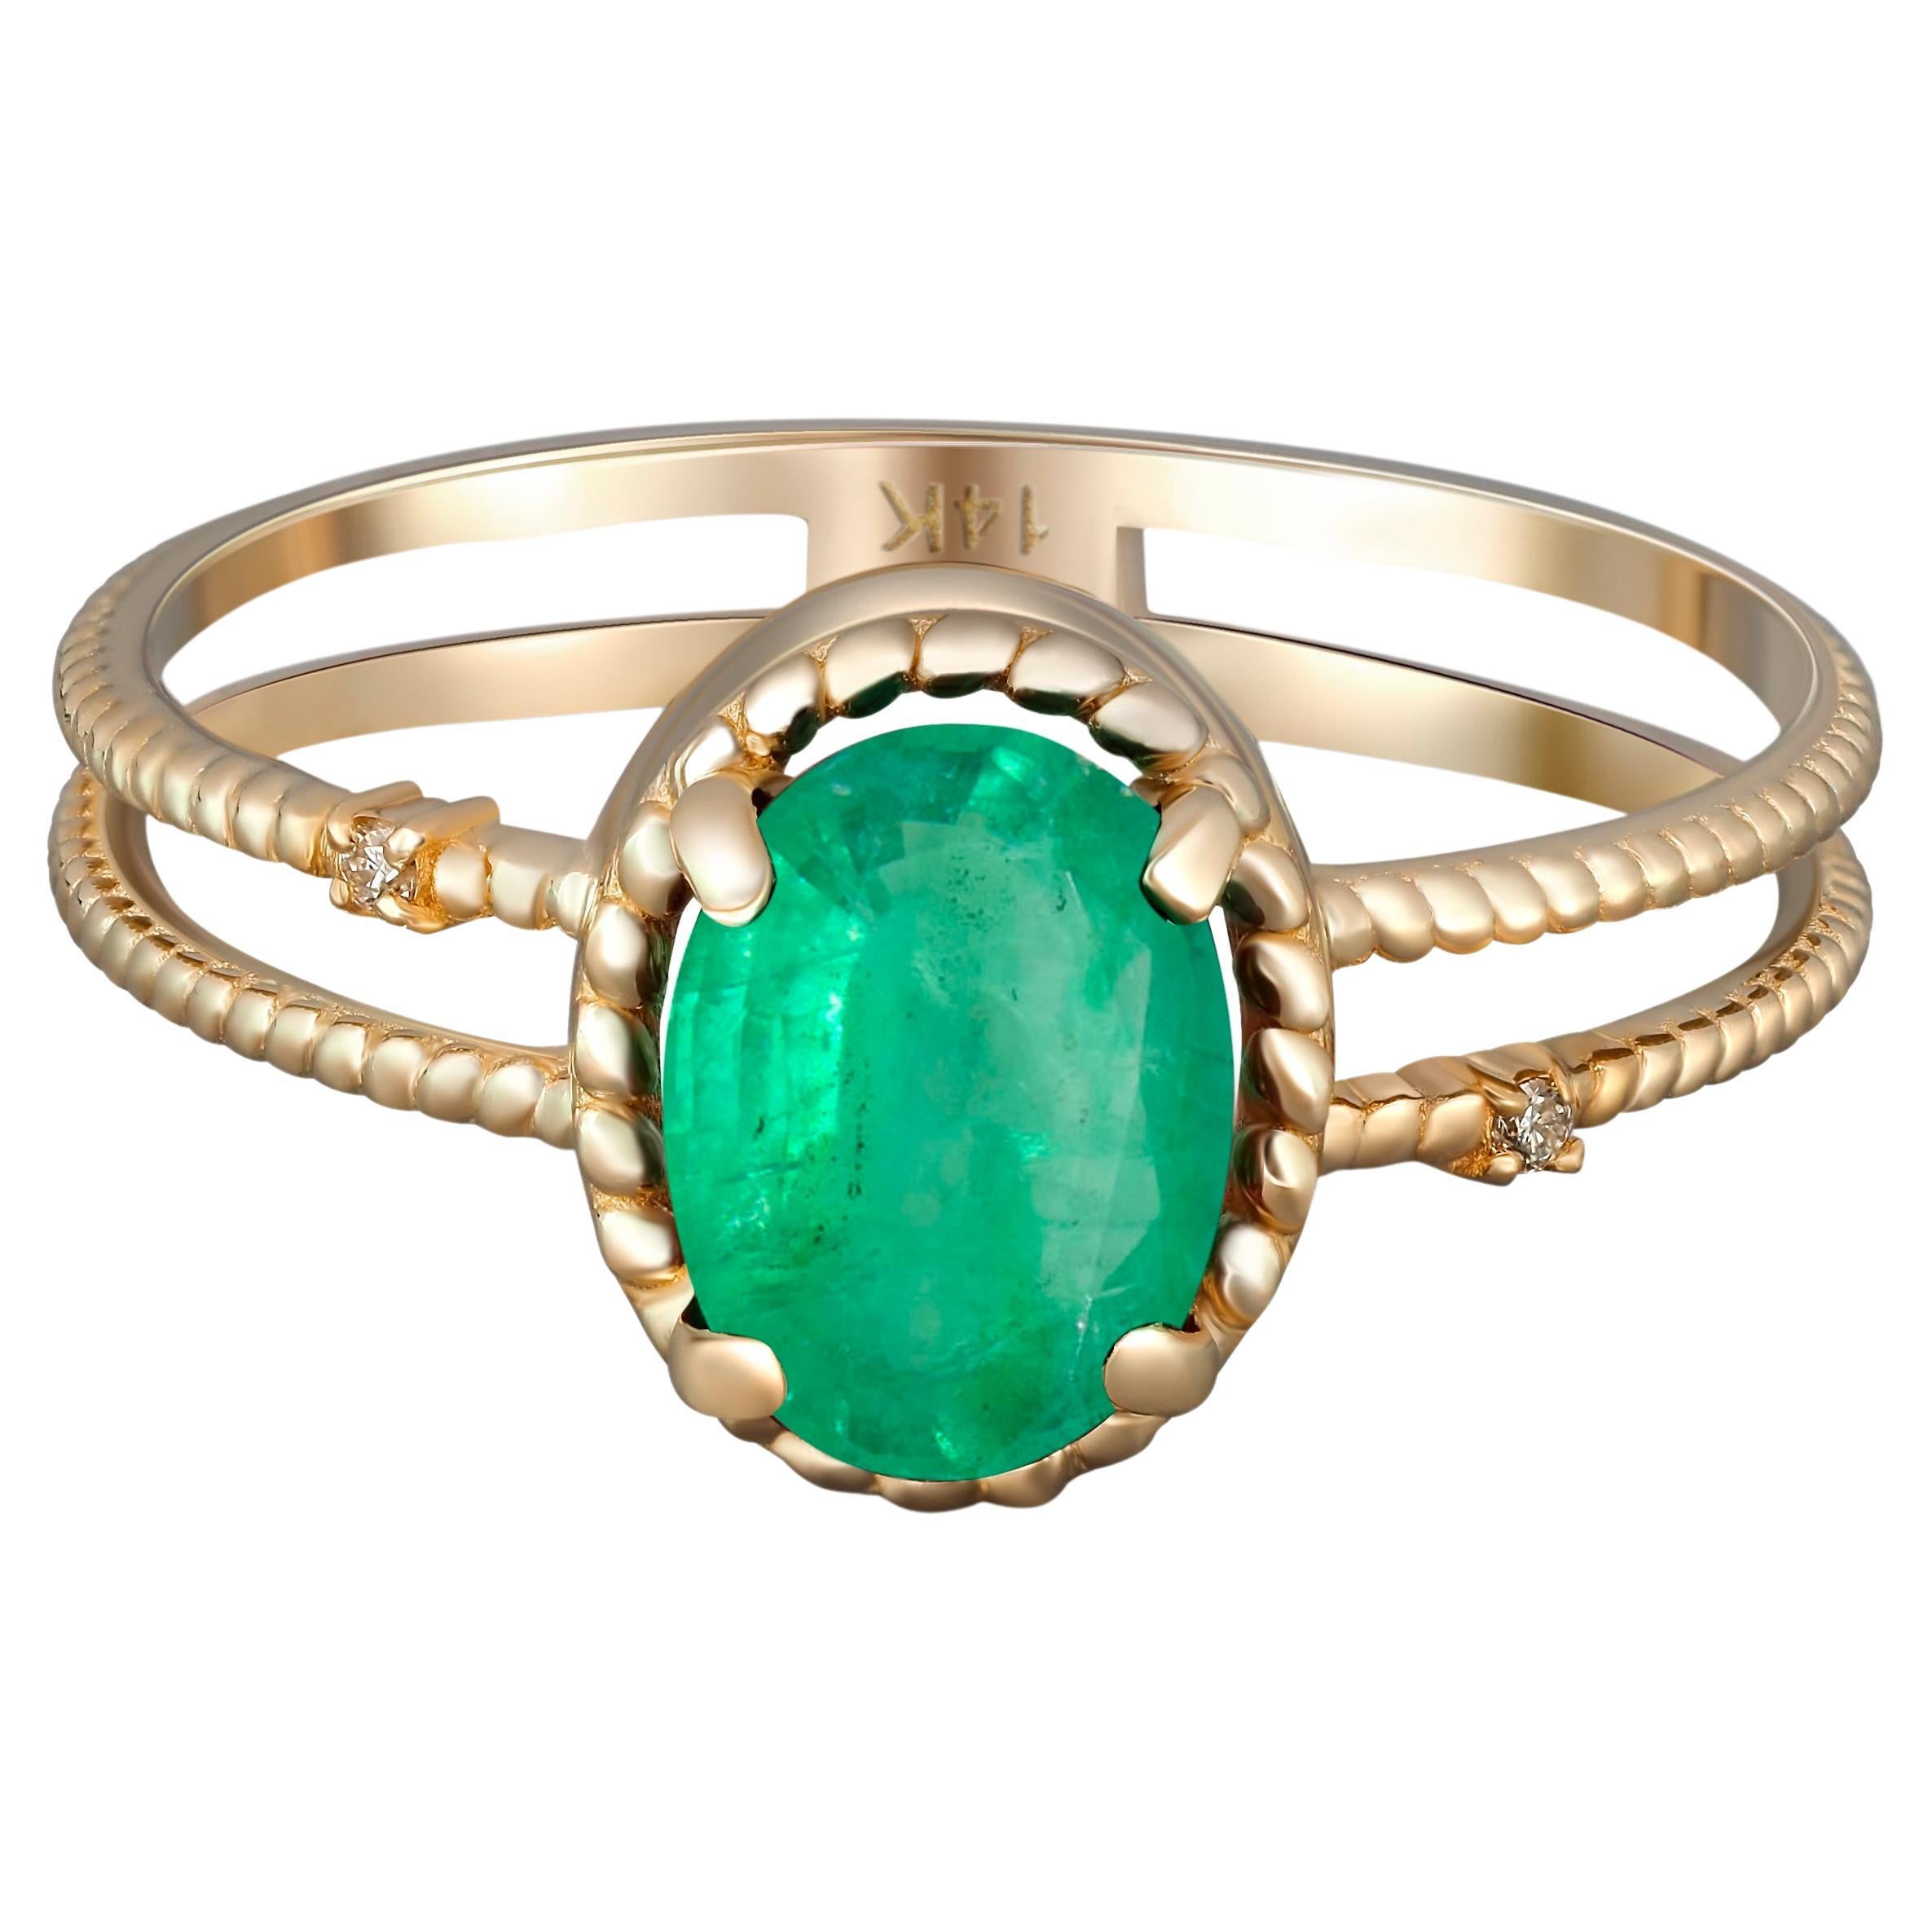 For Sale:  Emerald Gold Ring, Oval Emerald Ring, 14k Gold Ring with Emerald